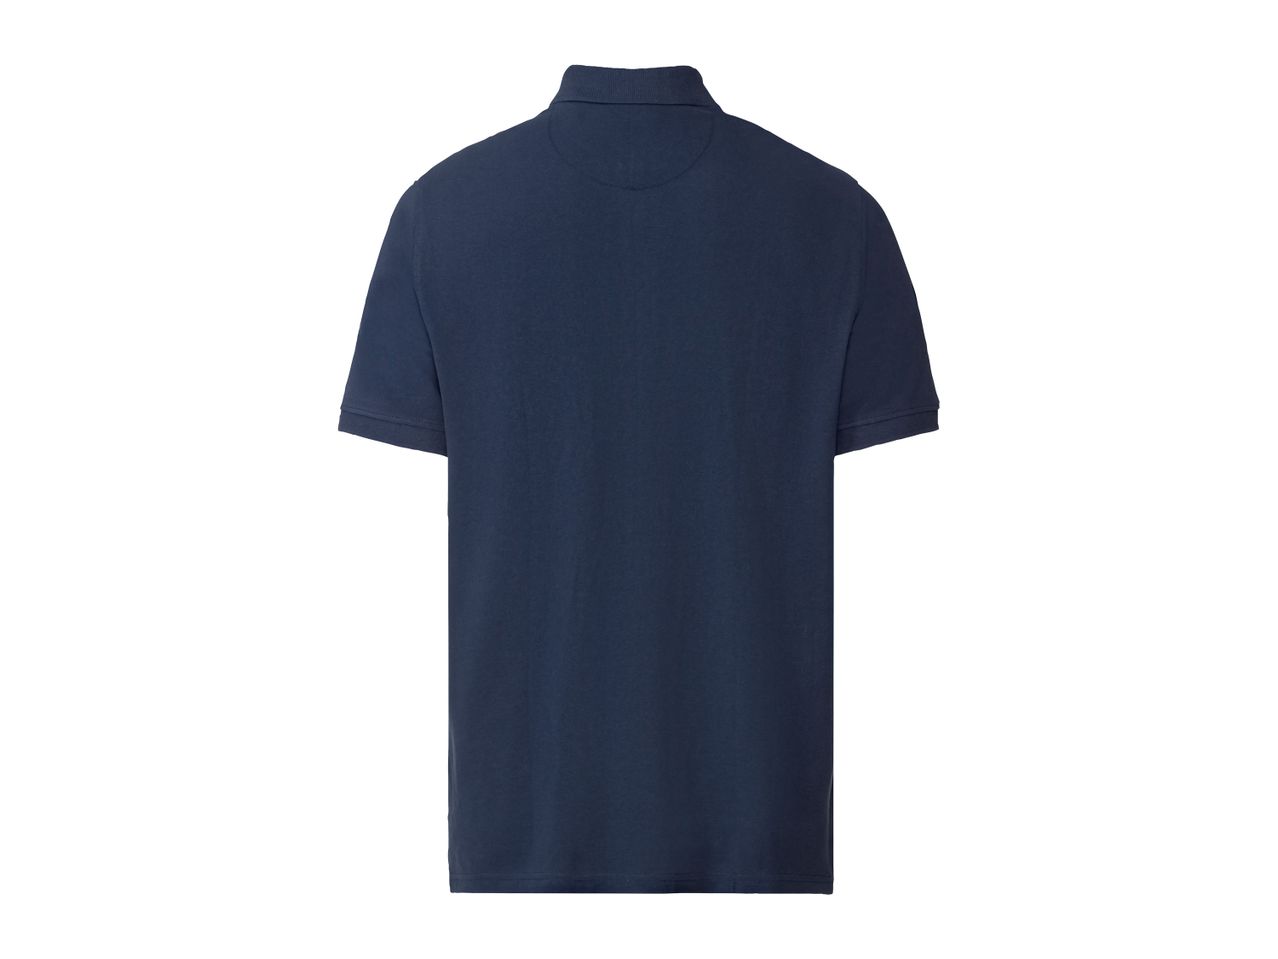 Go to full screen view: Men’s Polo Shirt - Image 2